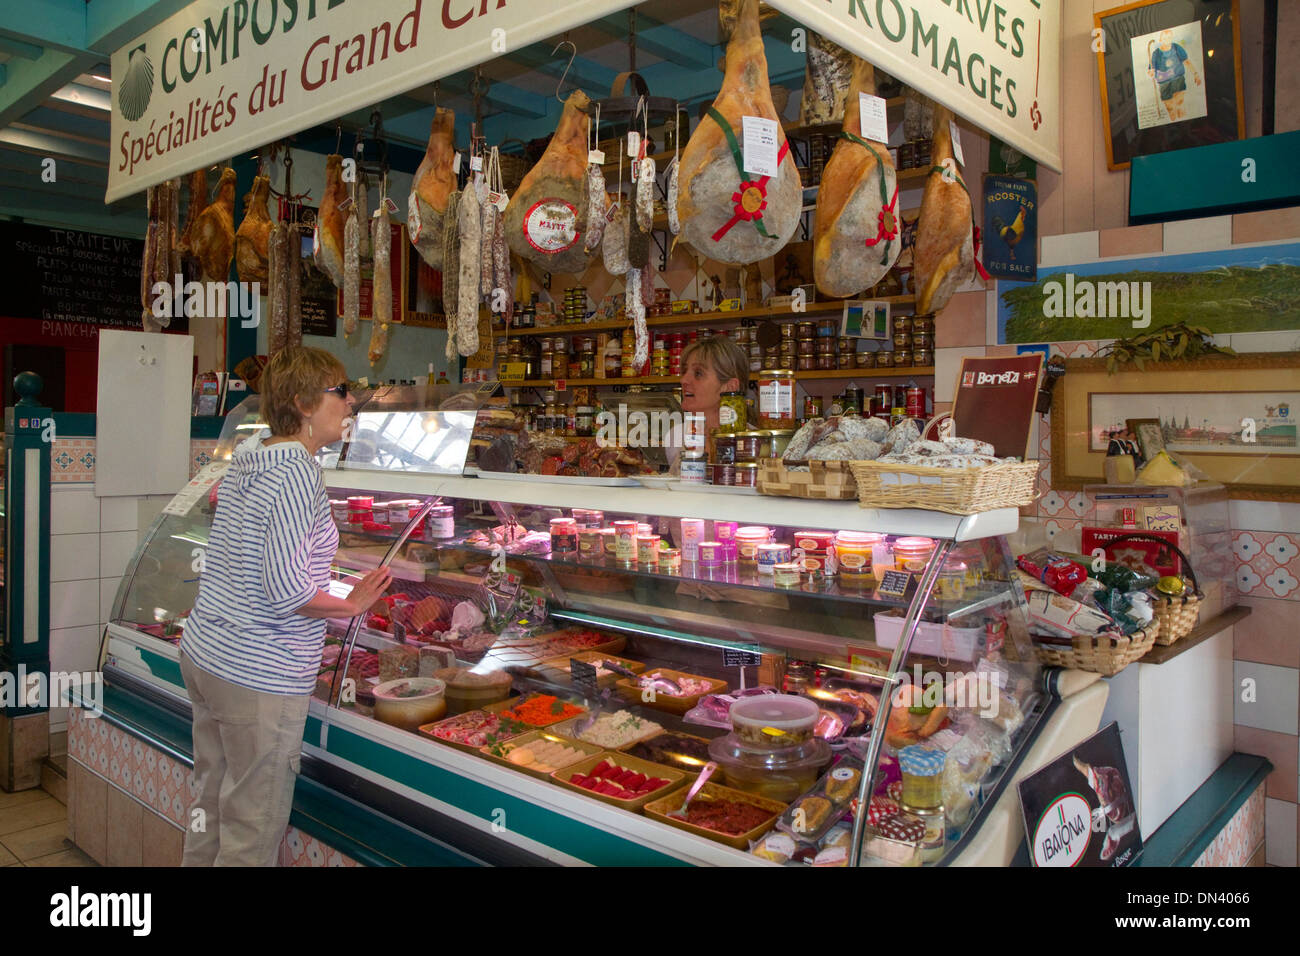 Charcuterie selling cured meats in a Basque market at Saint-Jean-de-Luz in the Basque province of Labourd, southwestern France. Stock Photo